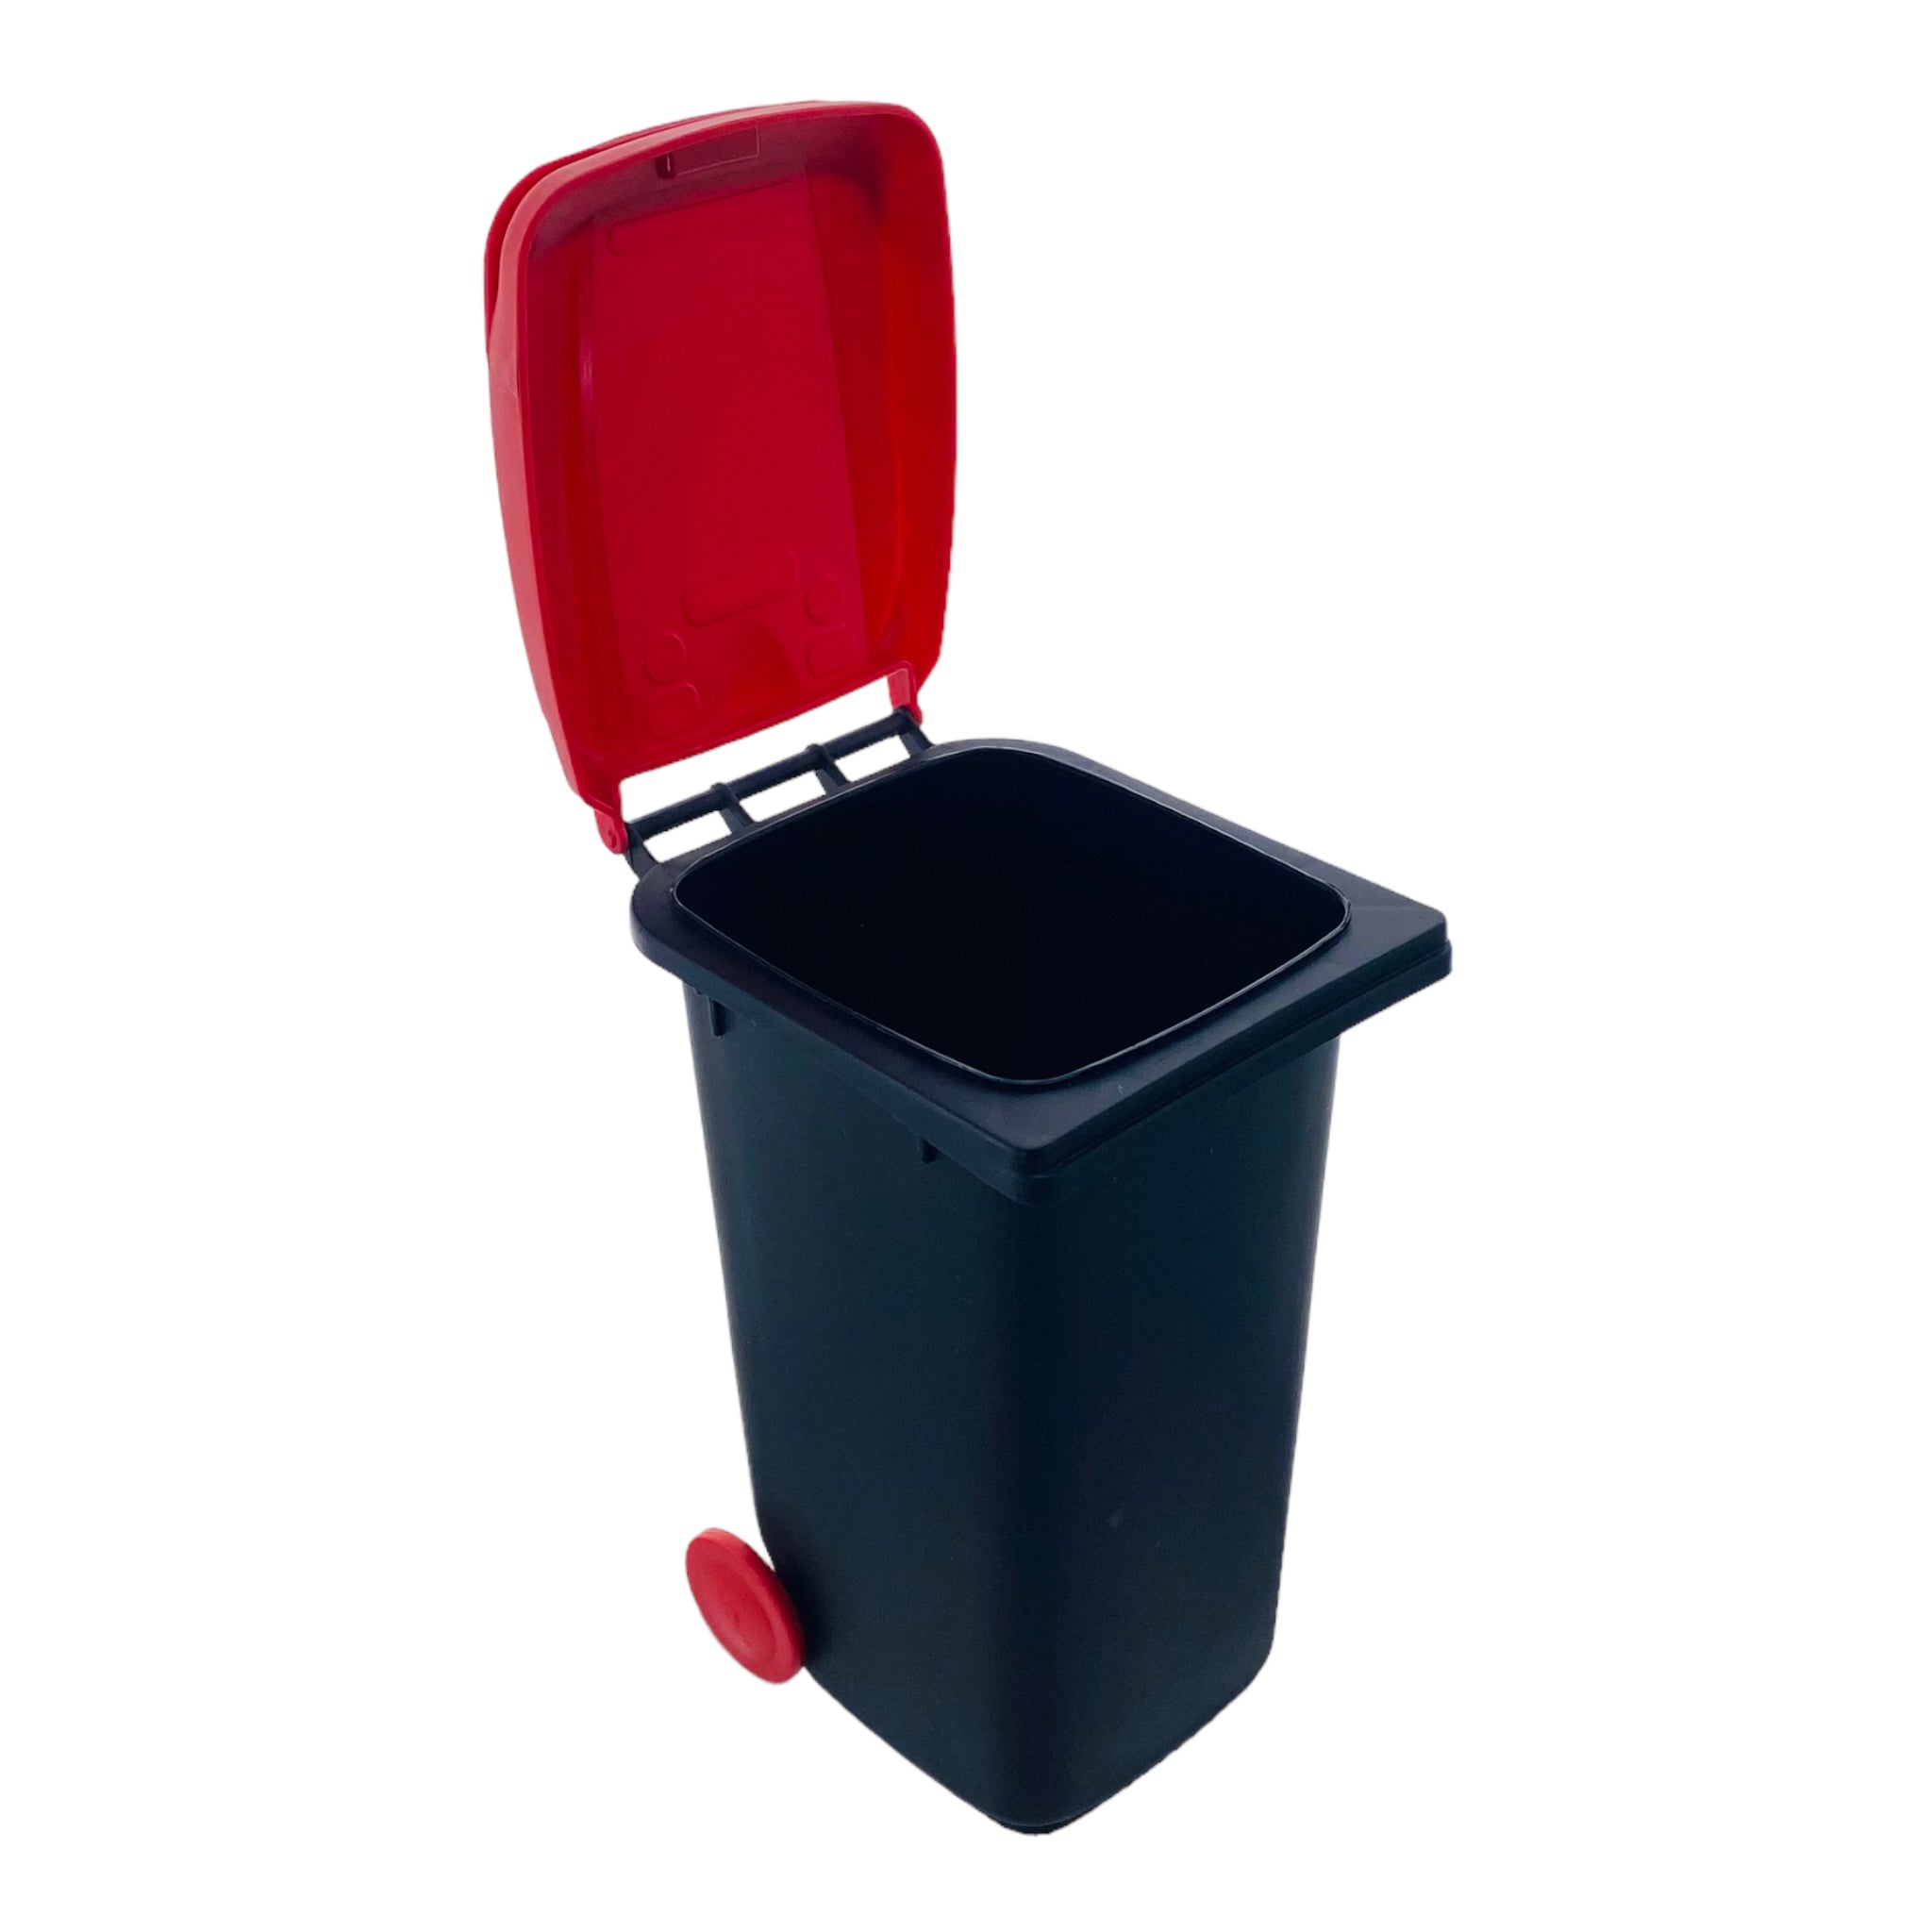 Mini Plastic Garbage Can is the perfect size for easy disposal and keeping your smoking area clean store your used q-tips and stems without taking up too much space